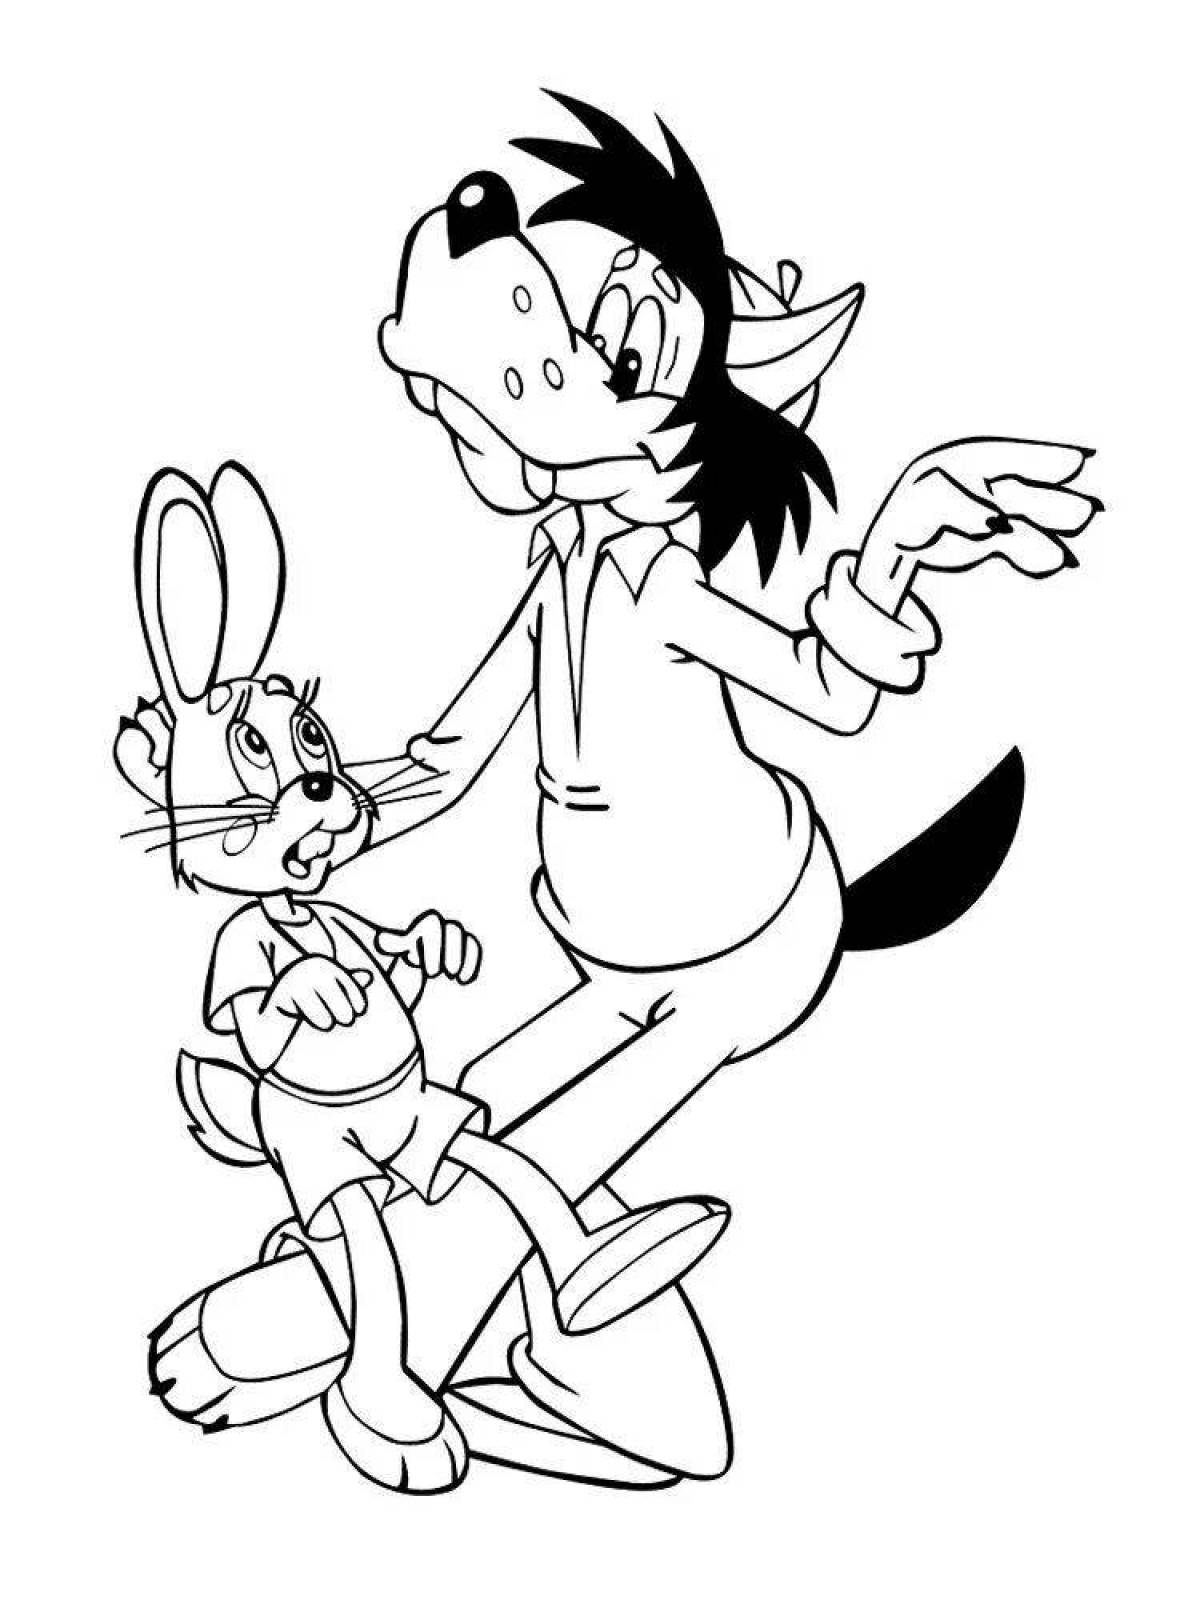 Live cartoon character coloring page